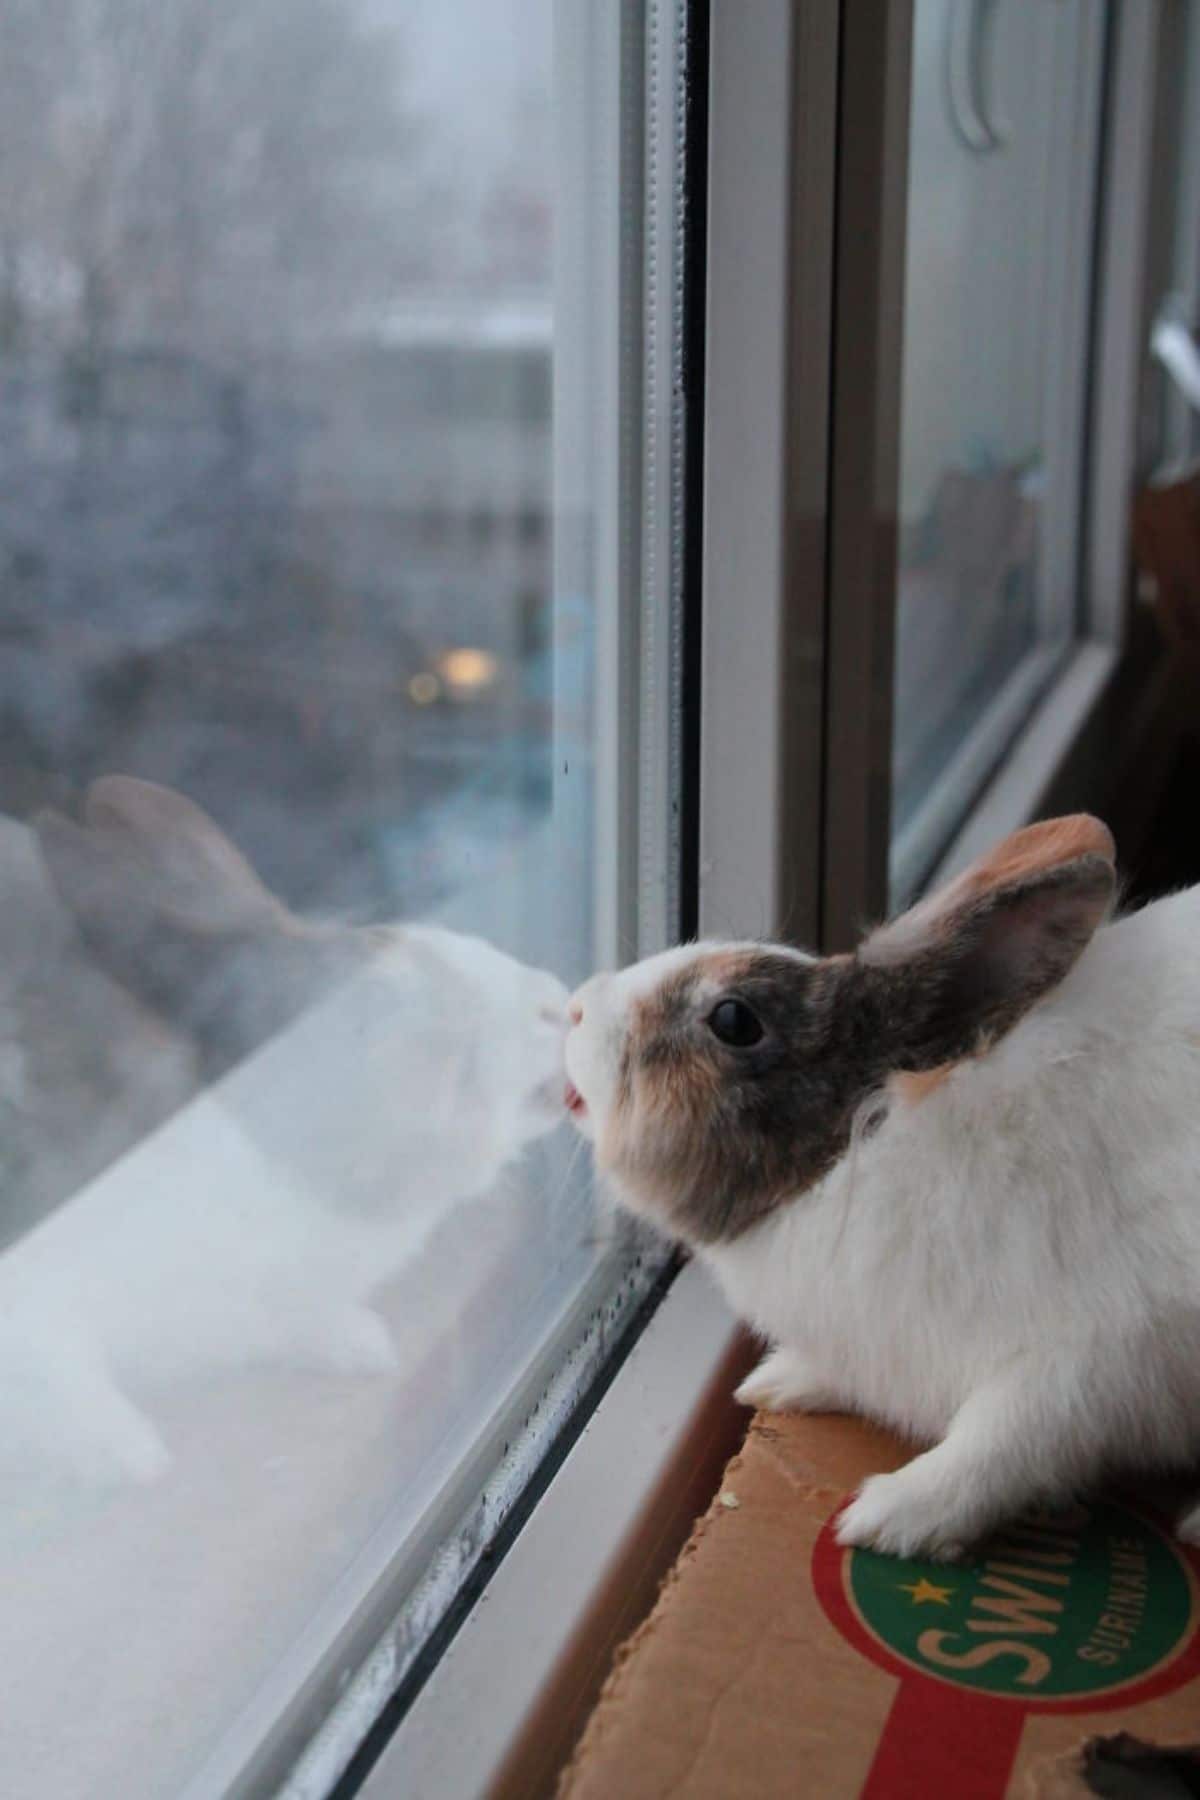 brown and white rabbit licking a glass window